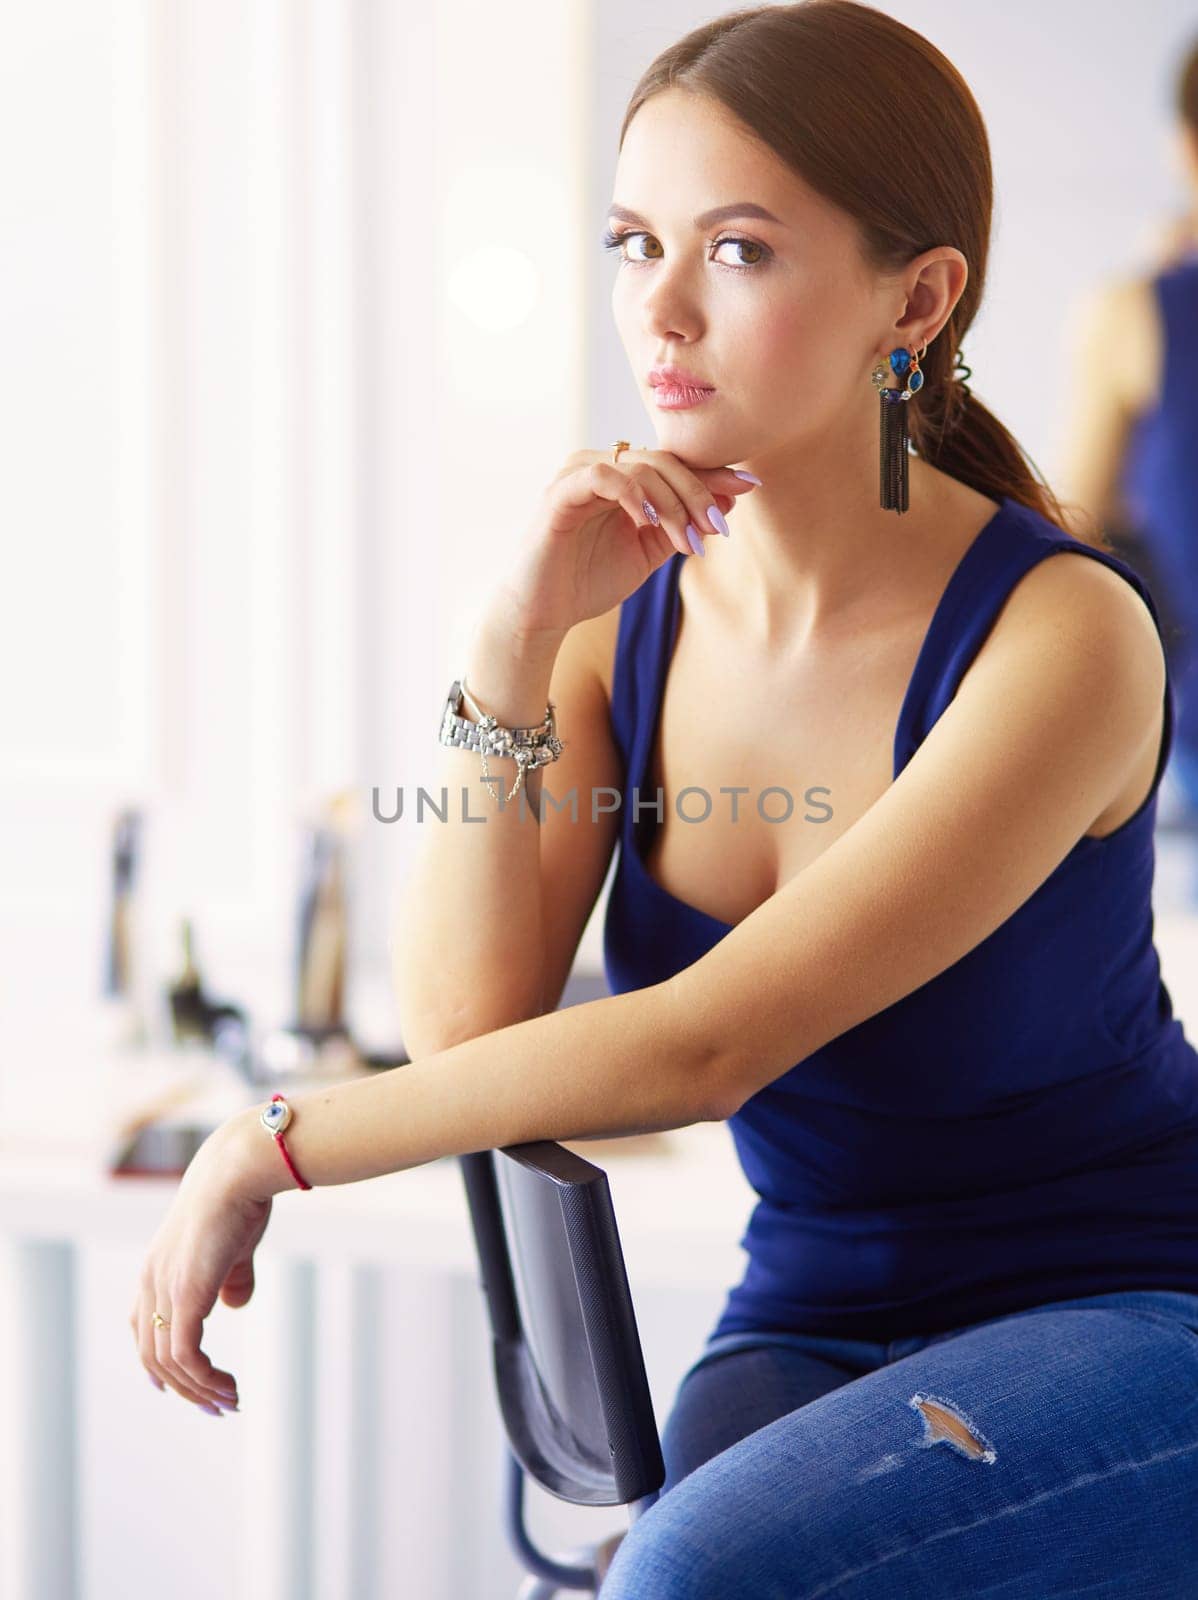 Young woman sitting on a chair isolated over white background.